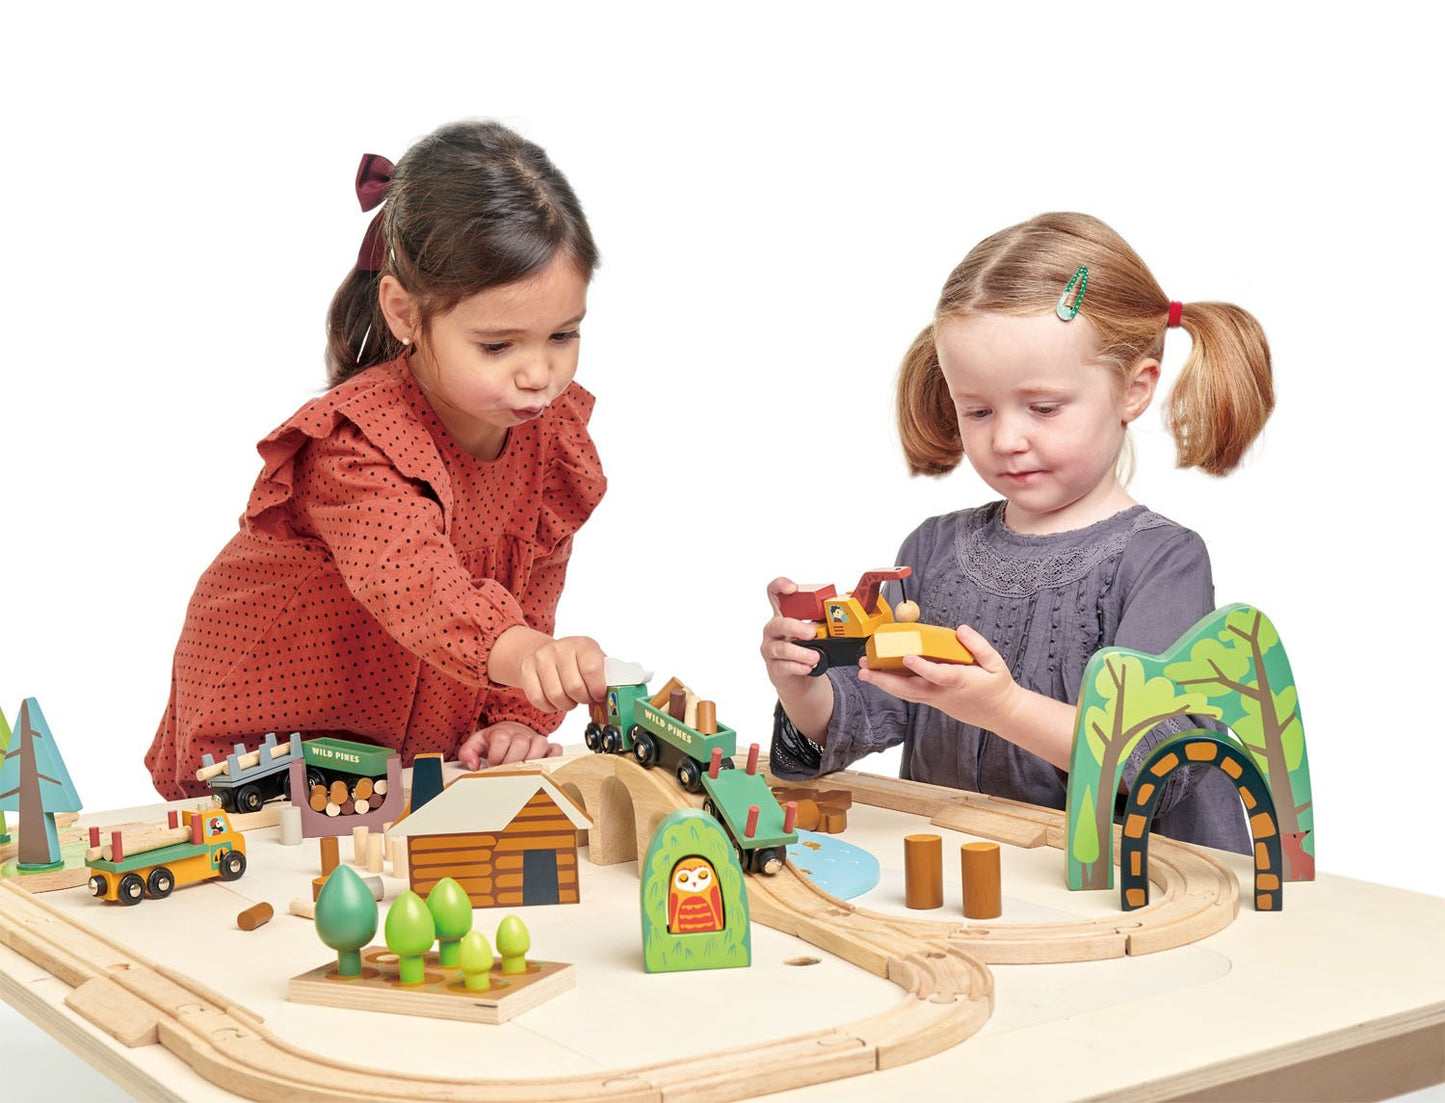 Children playing with wooden wild pines train set